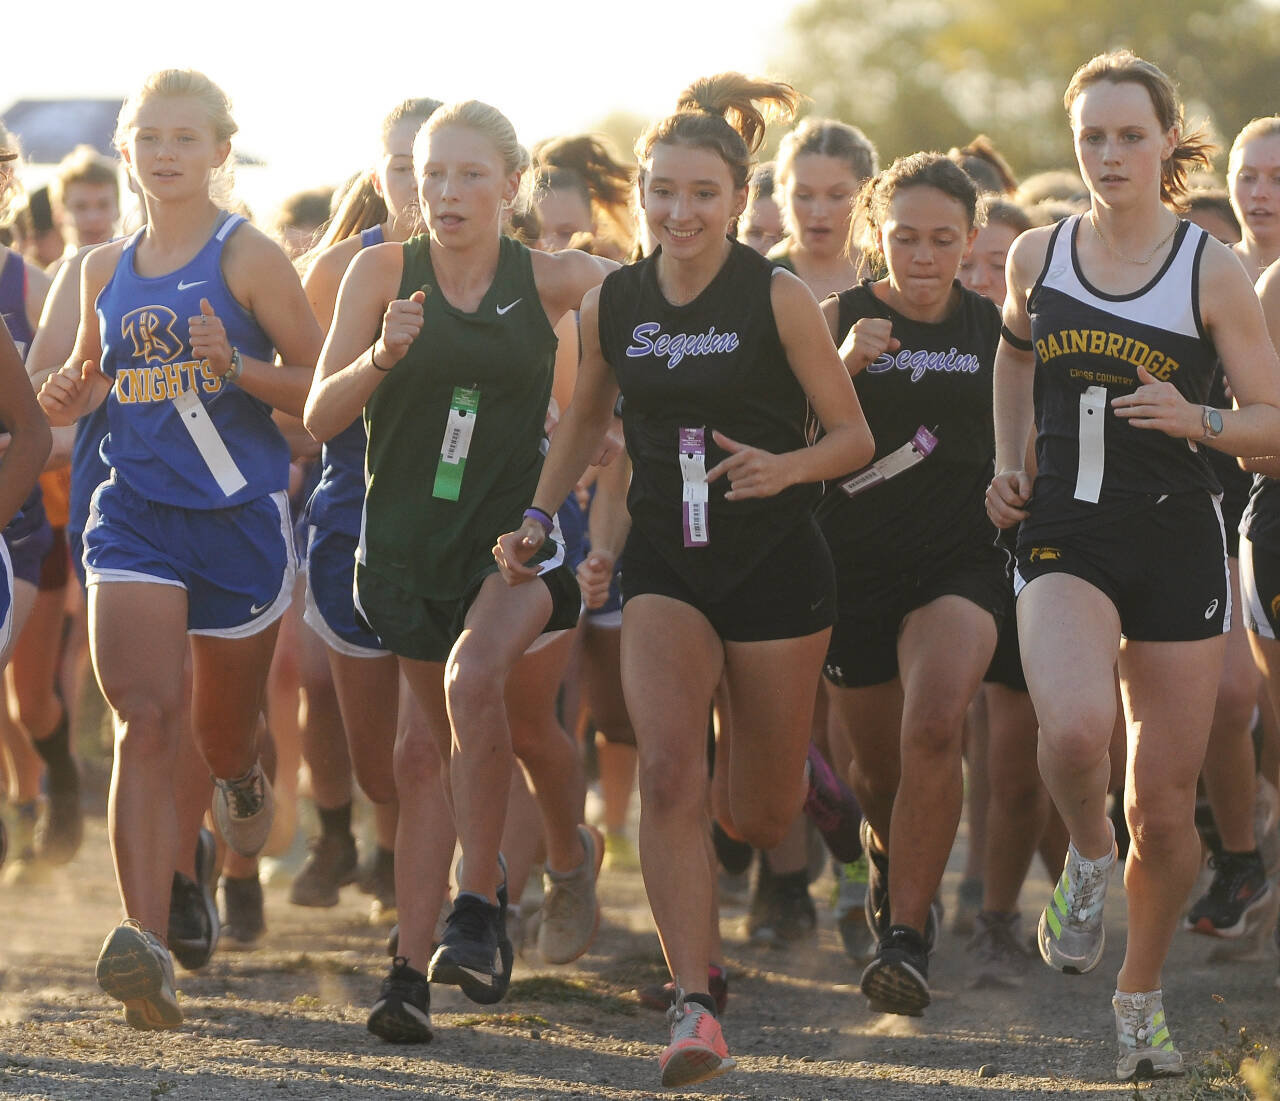 Sequim Gazette PHOTOS BY Michael Dashiell
Sequim’s Kaitlin Bloomenrader, center, leads the Wolves from the starting line at an Olympic League meet on Oct. 12 at Voice of America Park in Sequim. Bloomenrader was fourth in the meet (21:04).